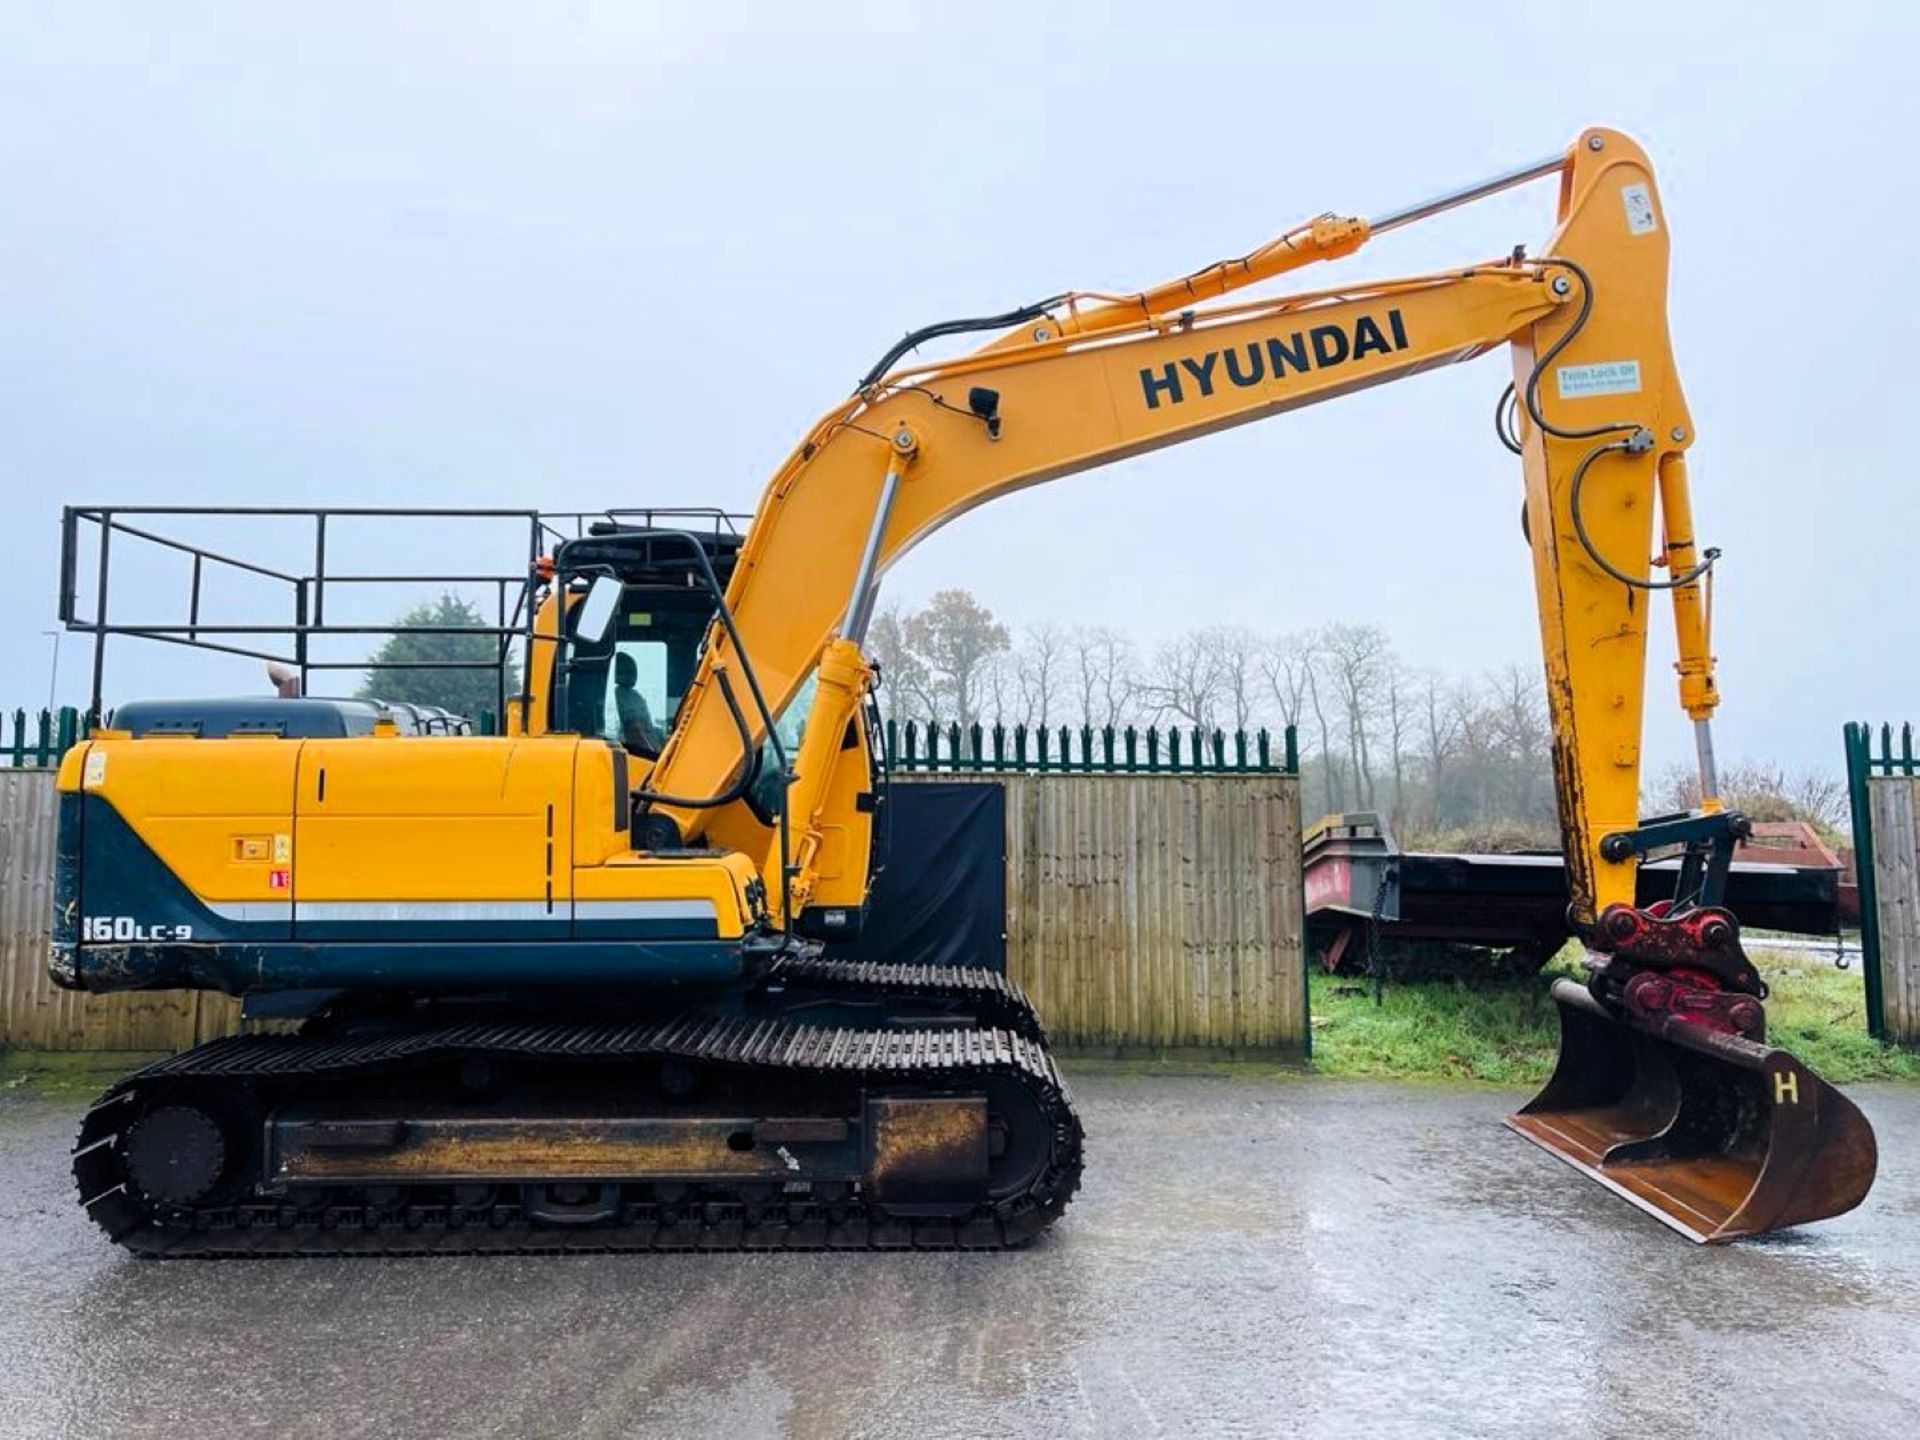 2013, HYUNDAI R160 LC-9 EXCAVATORHYUNDAI R160 LC-9 EXCAVATOR - Image 9 of 16